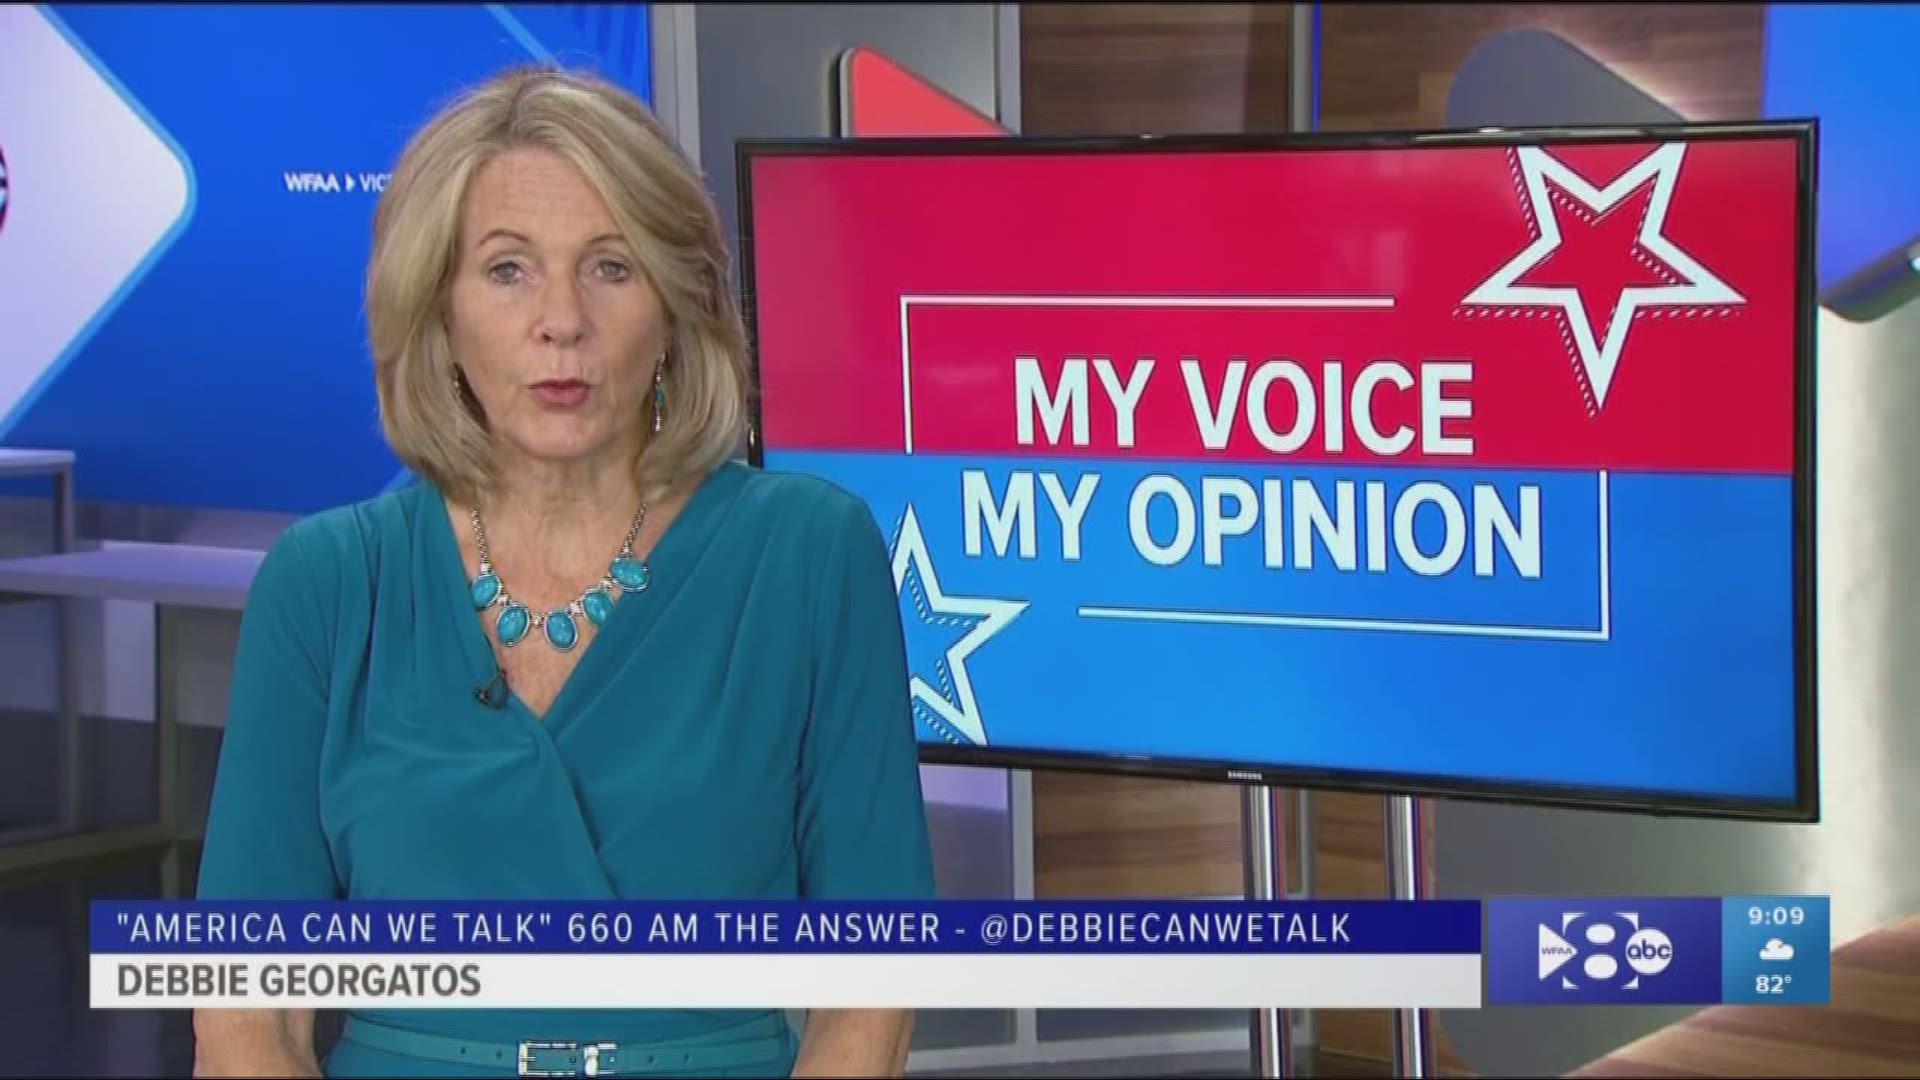 Immigrants seeking asylum is one angle of the border story that didn't get much attention in the last week. But Debbie Georgatos, from 660 AM The Answer, said asylum deserves a closer look in this week's My Voice, My Opinion.